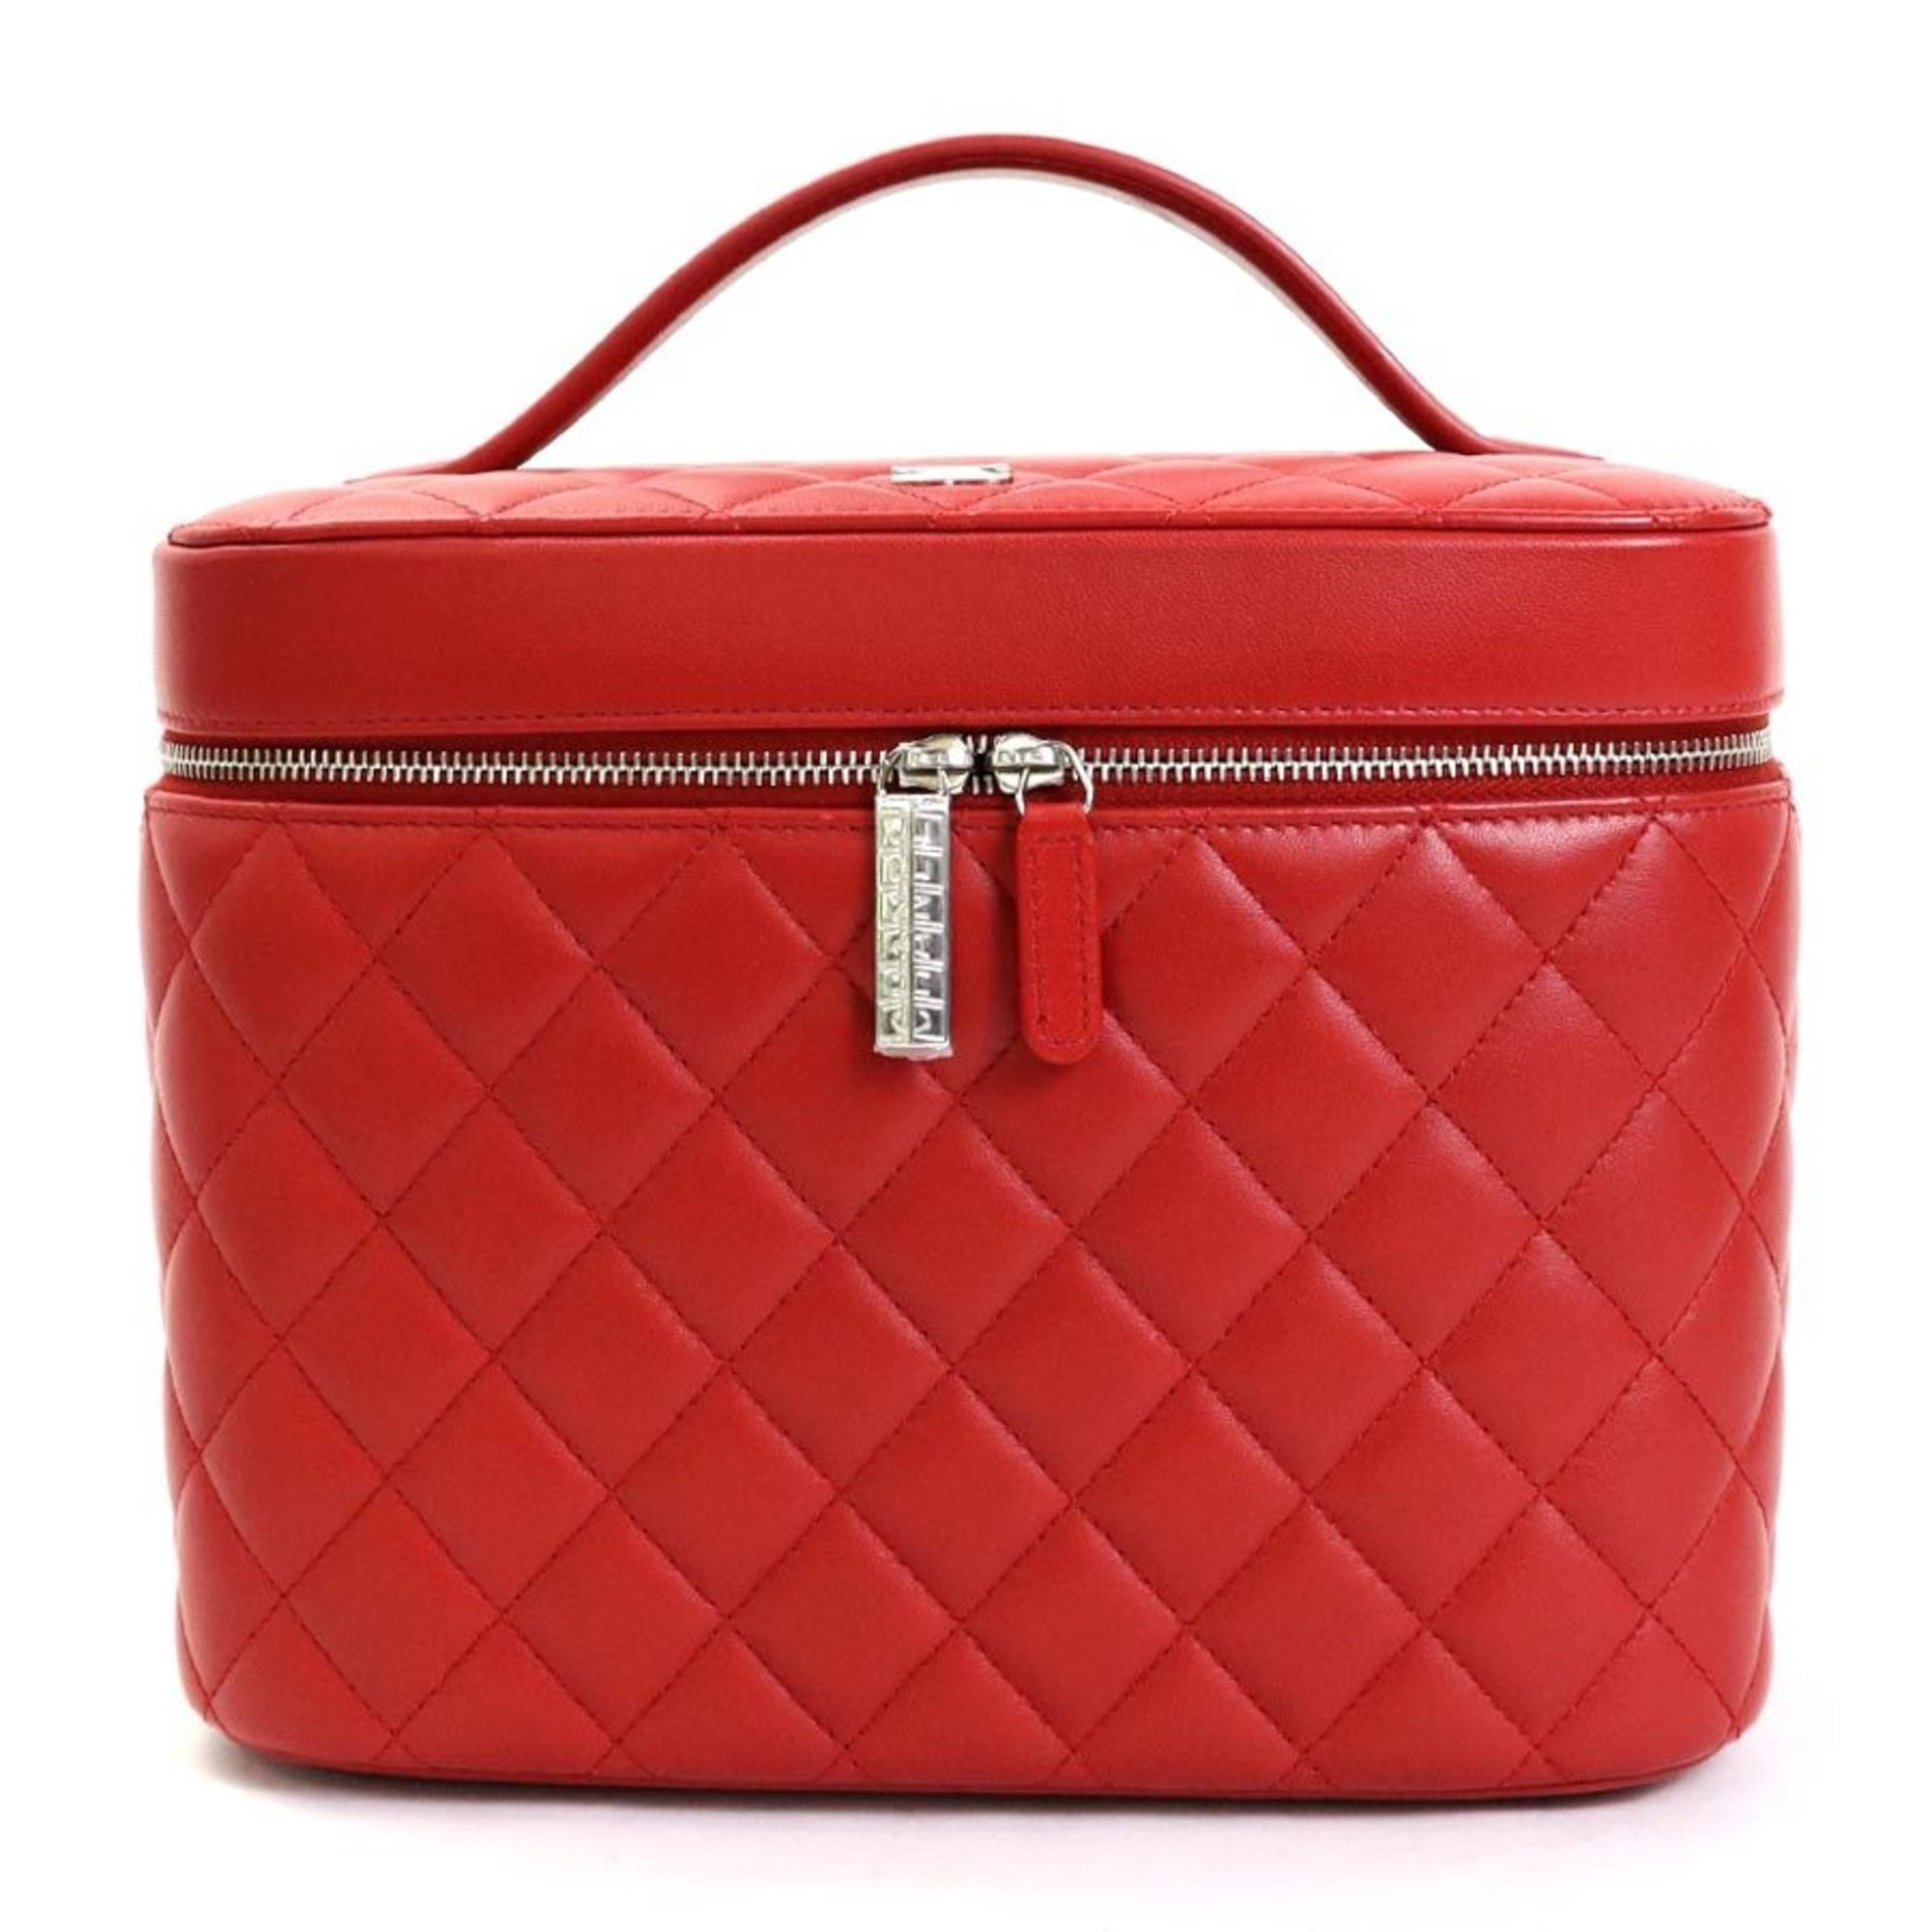 used Pre-owned Chanel Chanel Handbag Vanity Bag Matelasse Coco Mark Lambskin Red Women's A80913 (Like New), Adult Unisex, Size: (HxWxD): 17.5cm x